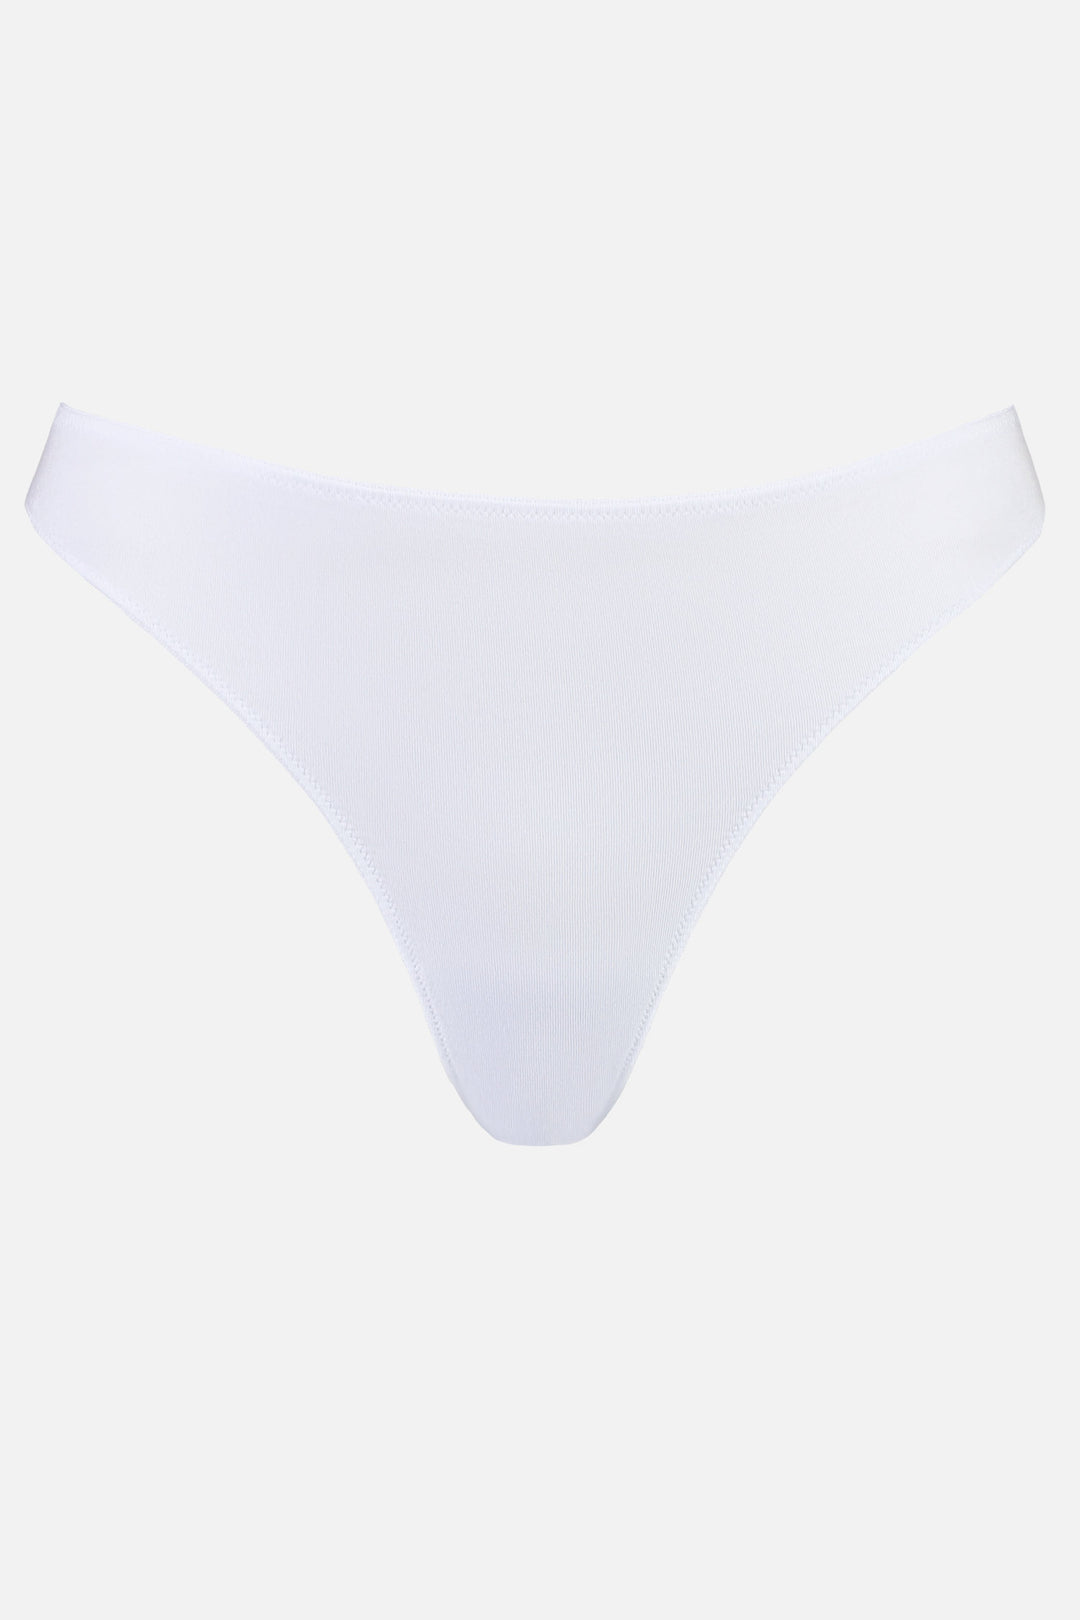 Videris Lingerie bikini knicker in white TENCEL™ a comfortable mid-rise style cut to follow the natural curve of your hips